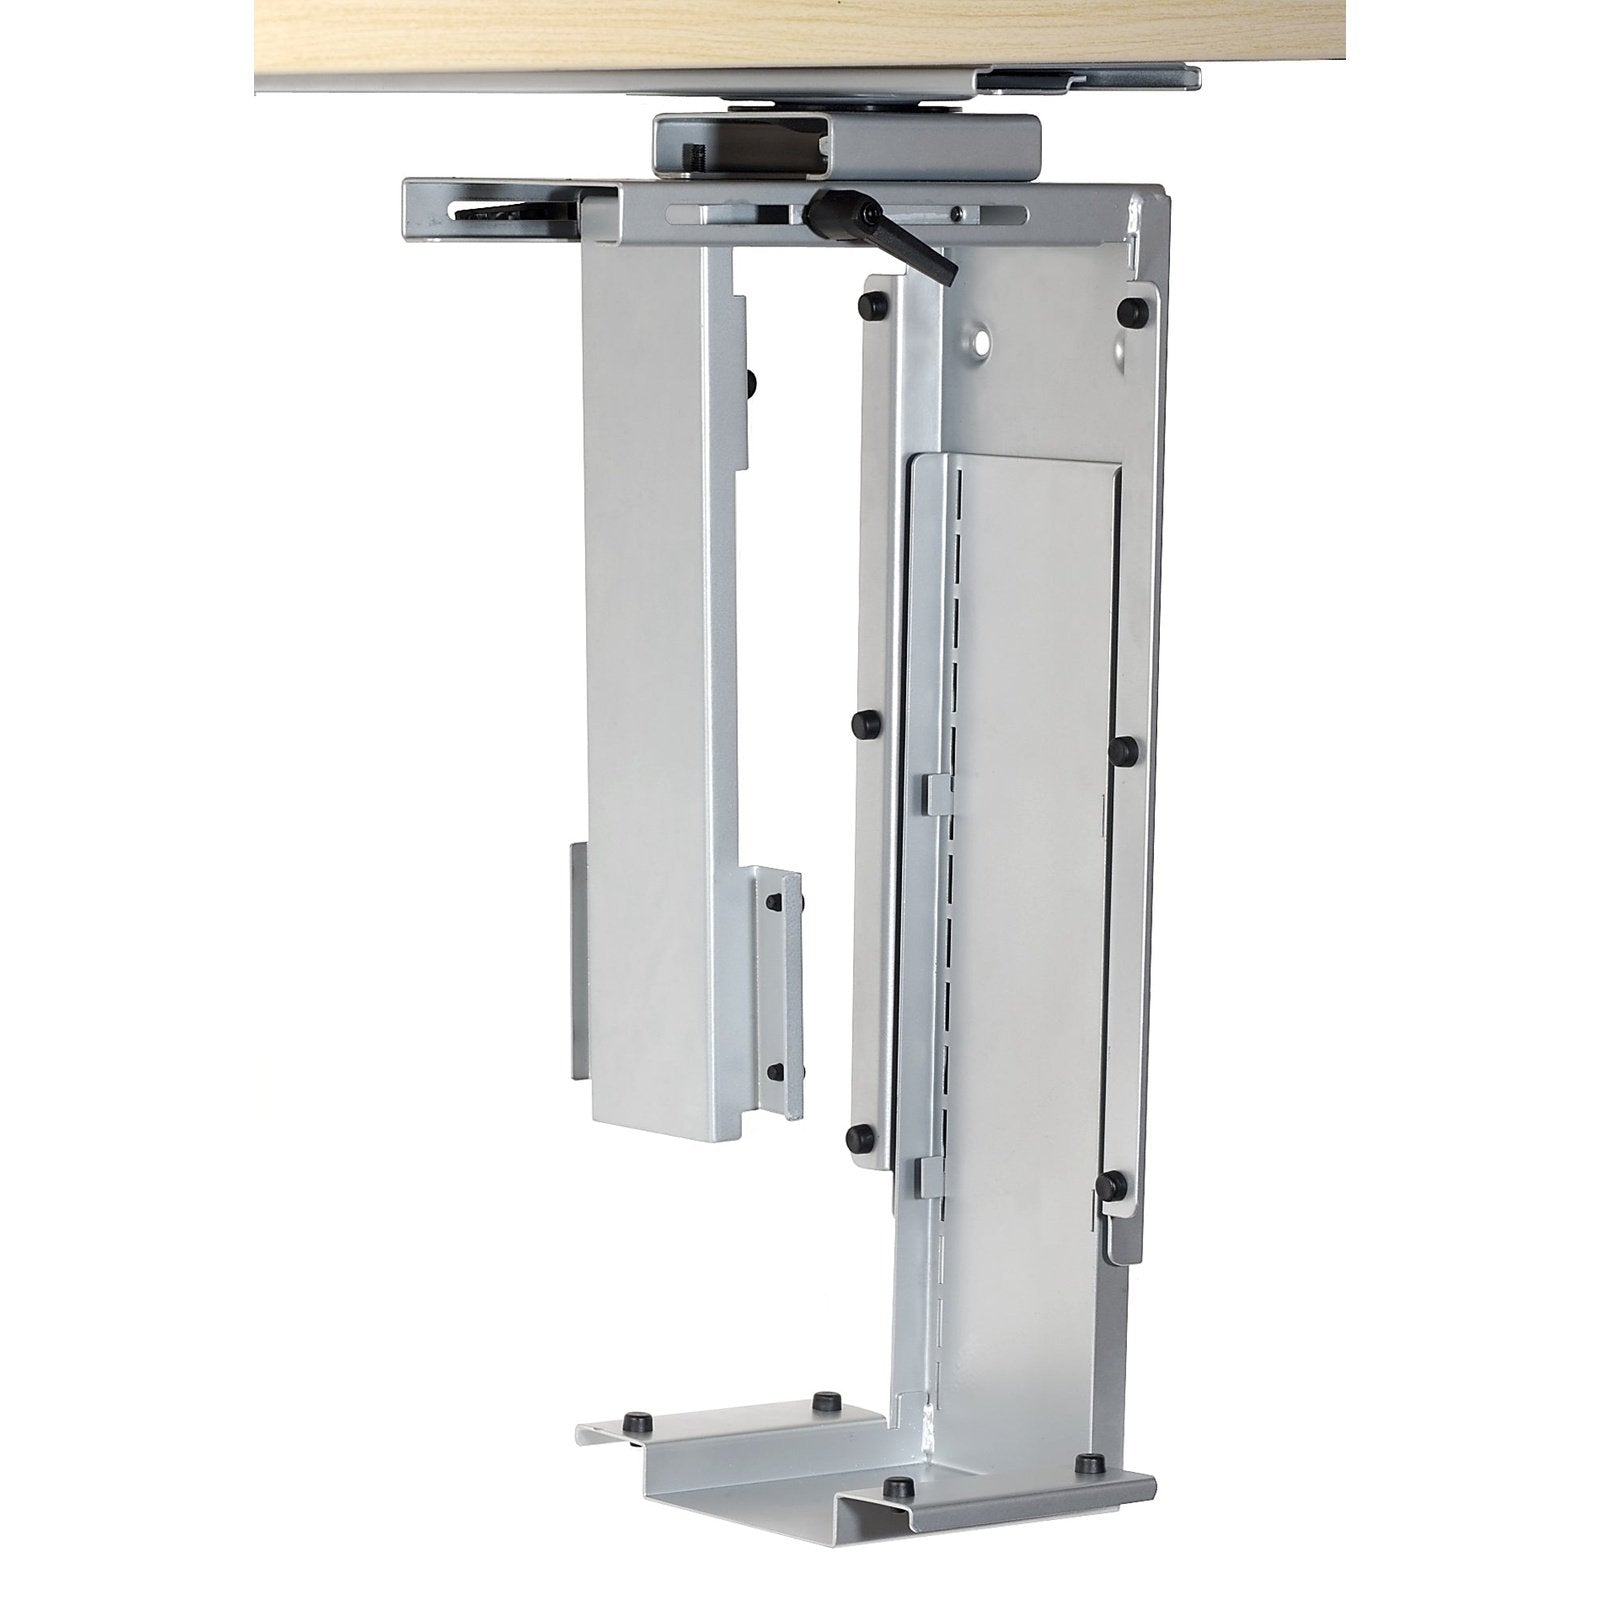 Impulse Slide & Turn PC Holder - Steel Rectangular Computer Stand, Self-Assembly, 360mm Height, 1-Year Guarantee